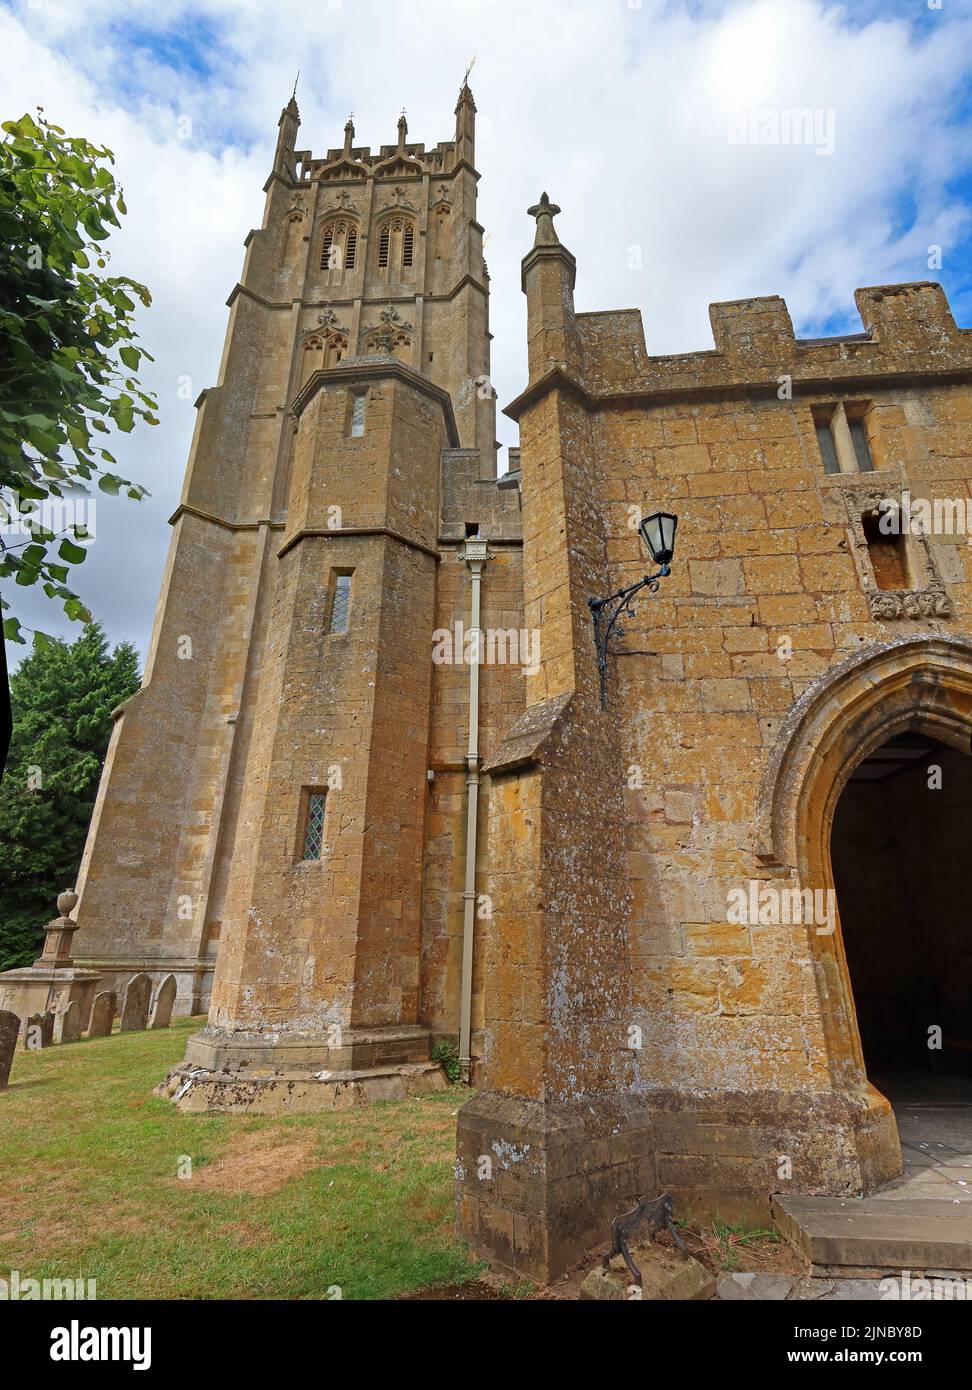 St James wool church tower ,Chipping Campden, Cotswolds, Oxfordshire, England, UK, GL55 6AA Stock Photo